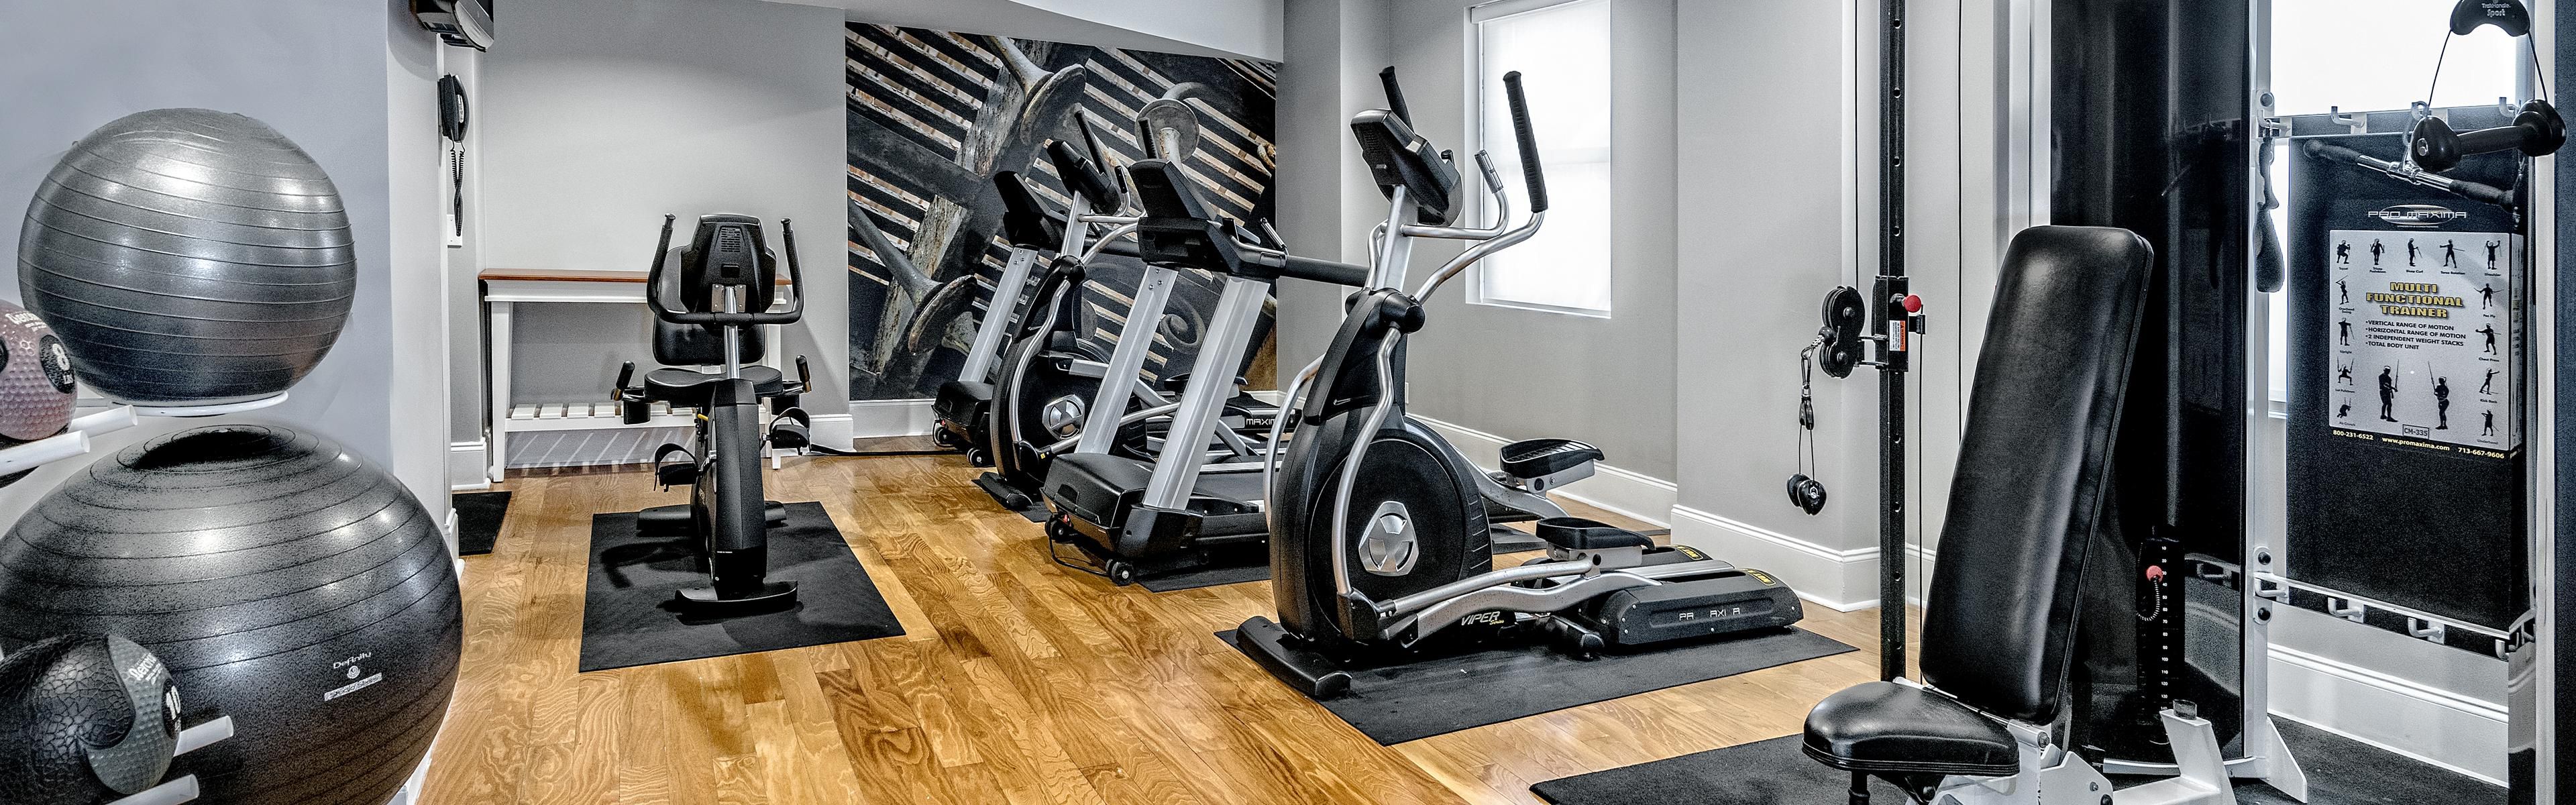 Get worked up in our Fitness Center.